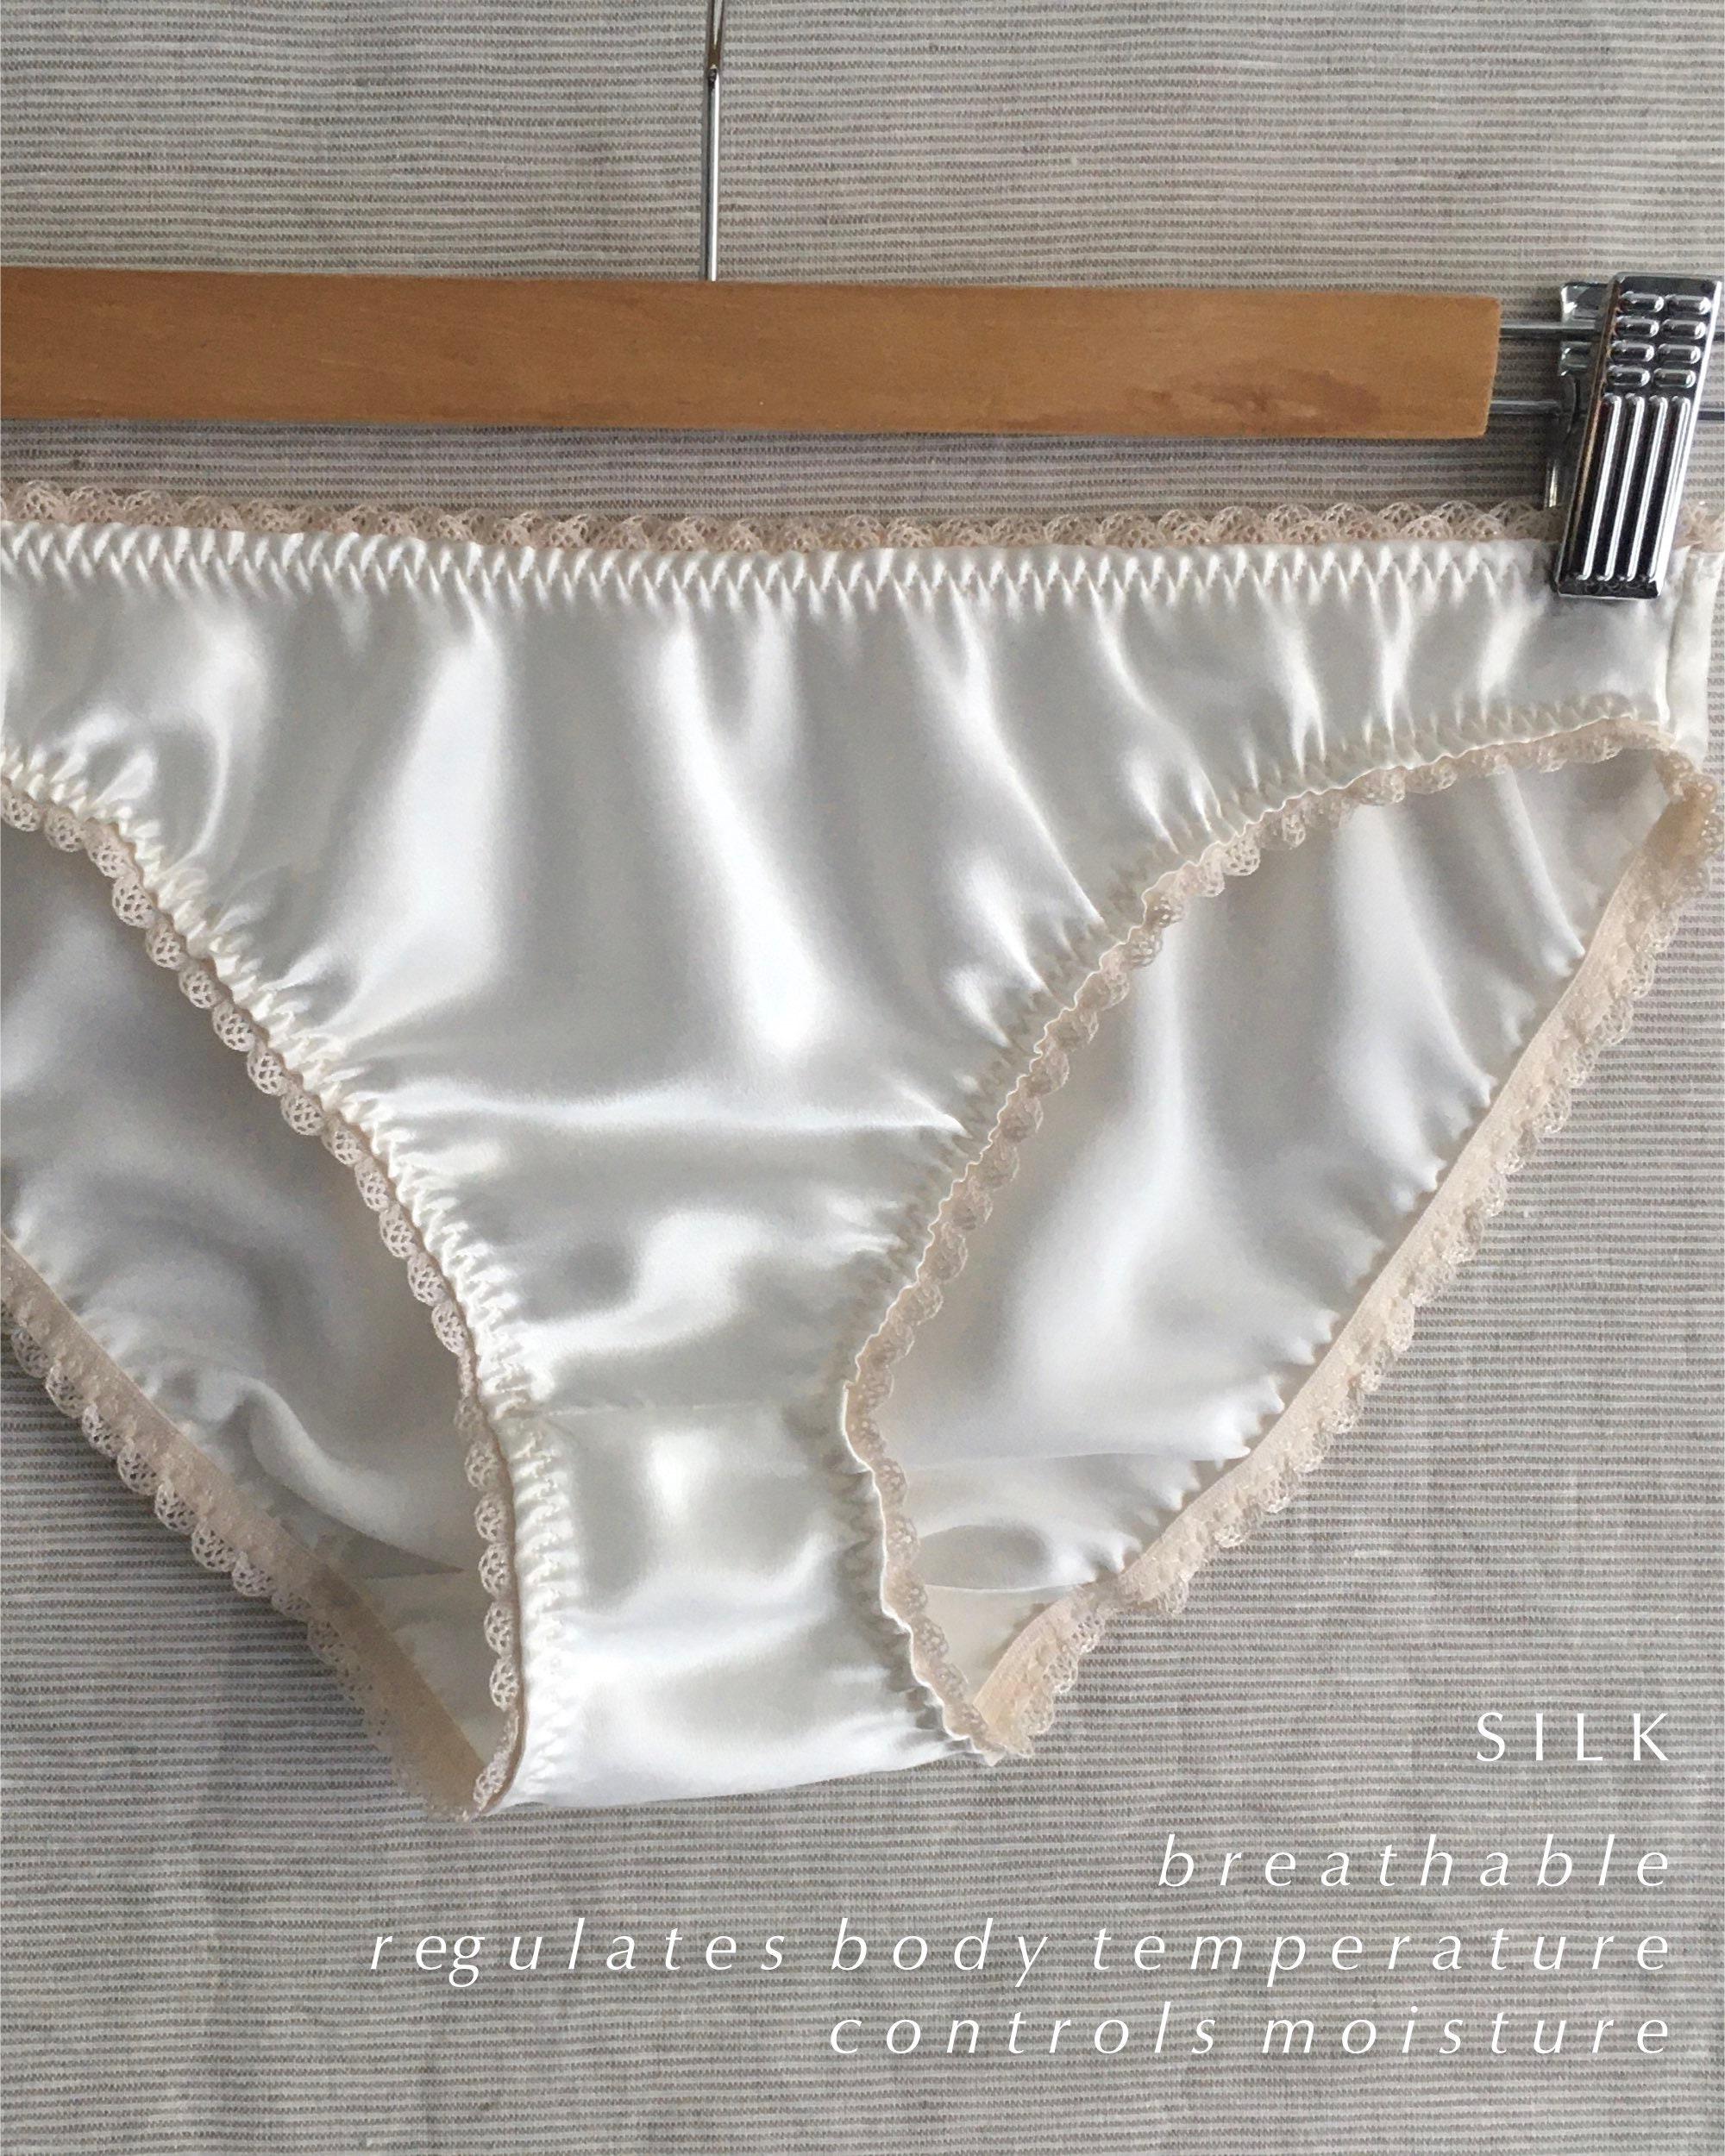 Womens Satin Panties Gift Box, Ivory Silk Knickers, Low Rise Briefs, White  Bridal Lingerie, Underwear Gift for Her, Unique Wedding Gift -  Hong  Kong